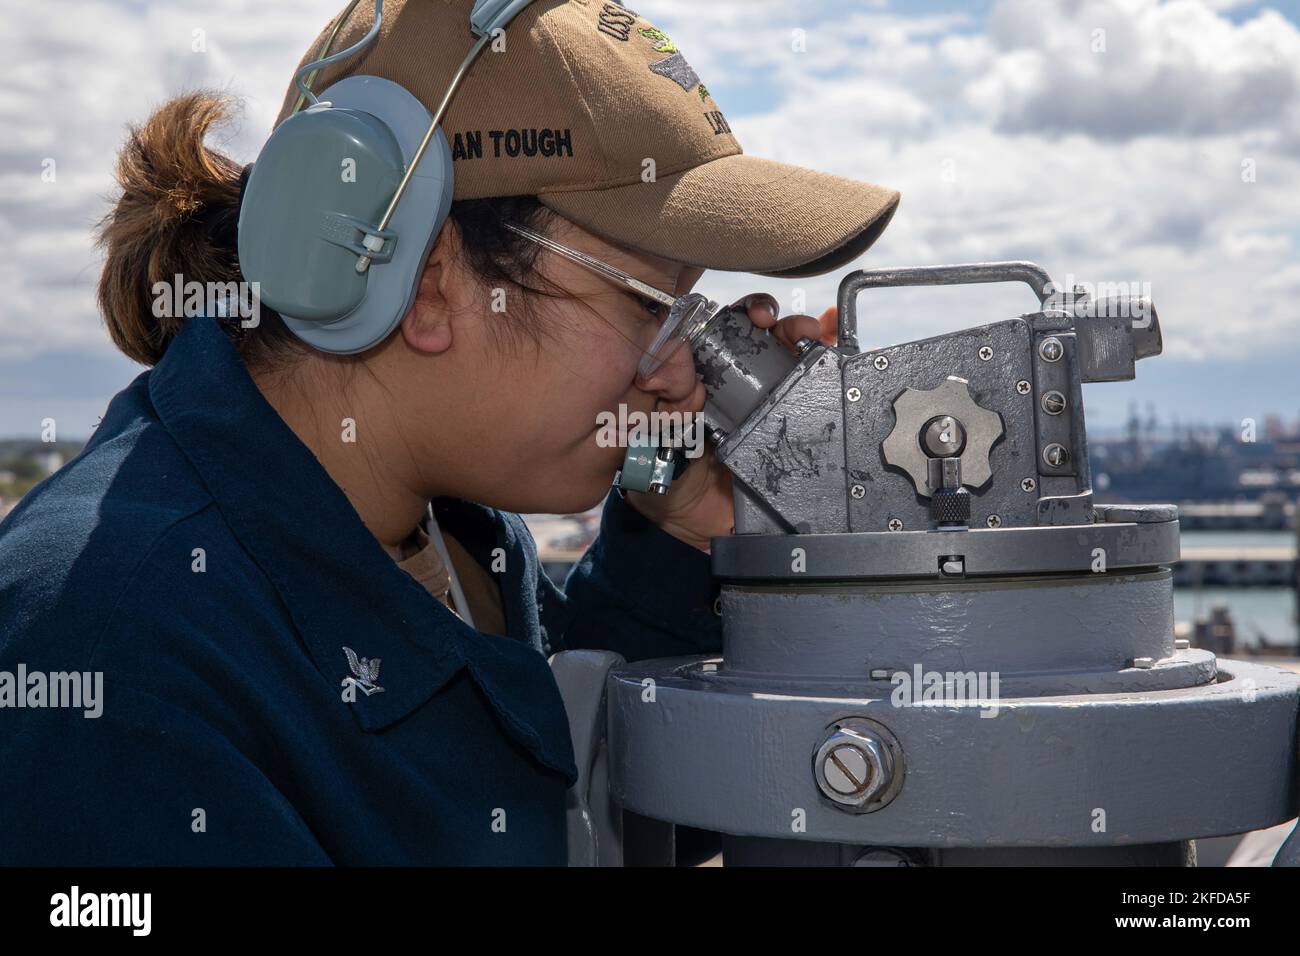 220908-N-VO895-1022  ATLANTIC OCEAN (Sept. 8, 2022) Quartermaster 3rd Class Leyda Perez, assigned to the Wasp-class amphibious assault ship USS Bataan (LHD 5) Navigation Department, uses an alidade to mark bearings on the ship’s observation deck, Sept. 8, 2022. Bataan is underway conducting an Afloat Training Group engineering inspection as part of the basic phase training cycle. Stock Photo